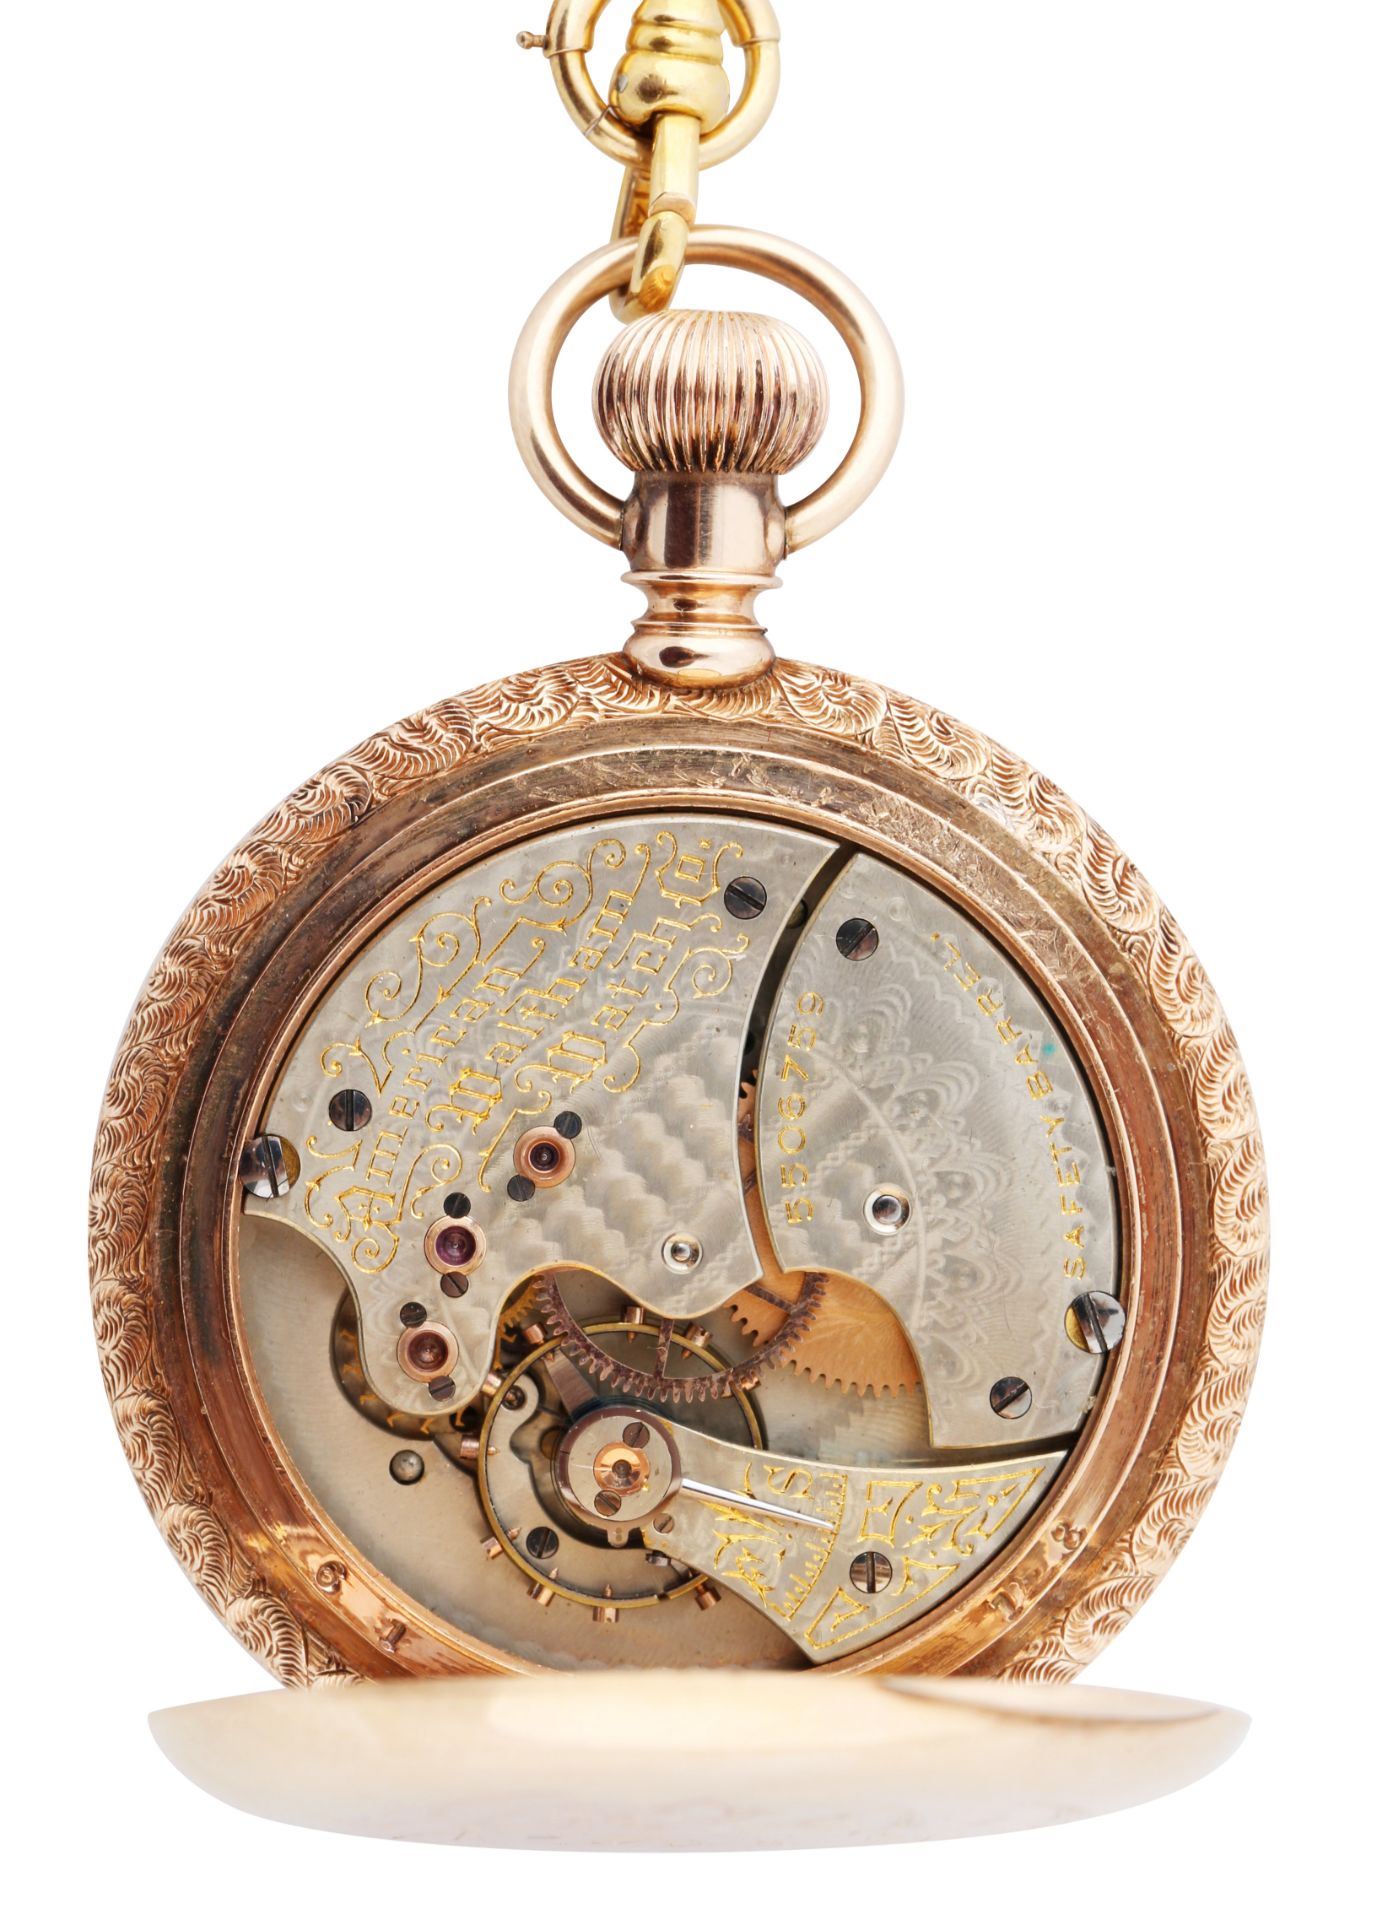 EROTIC AMERICAN WALTHAM 14K GOLD AND ENAMEL HUNTER CASE POCKET WATCH AND CHAIN, MOVEMENT NO. 5'506'7 - Image 7 of 7